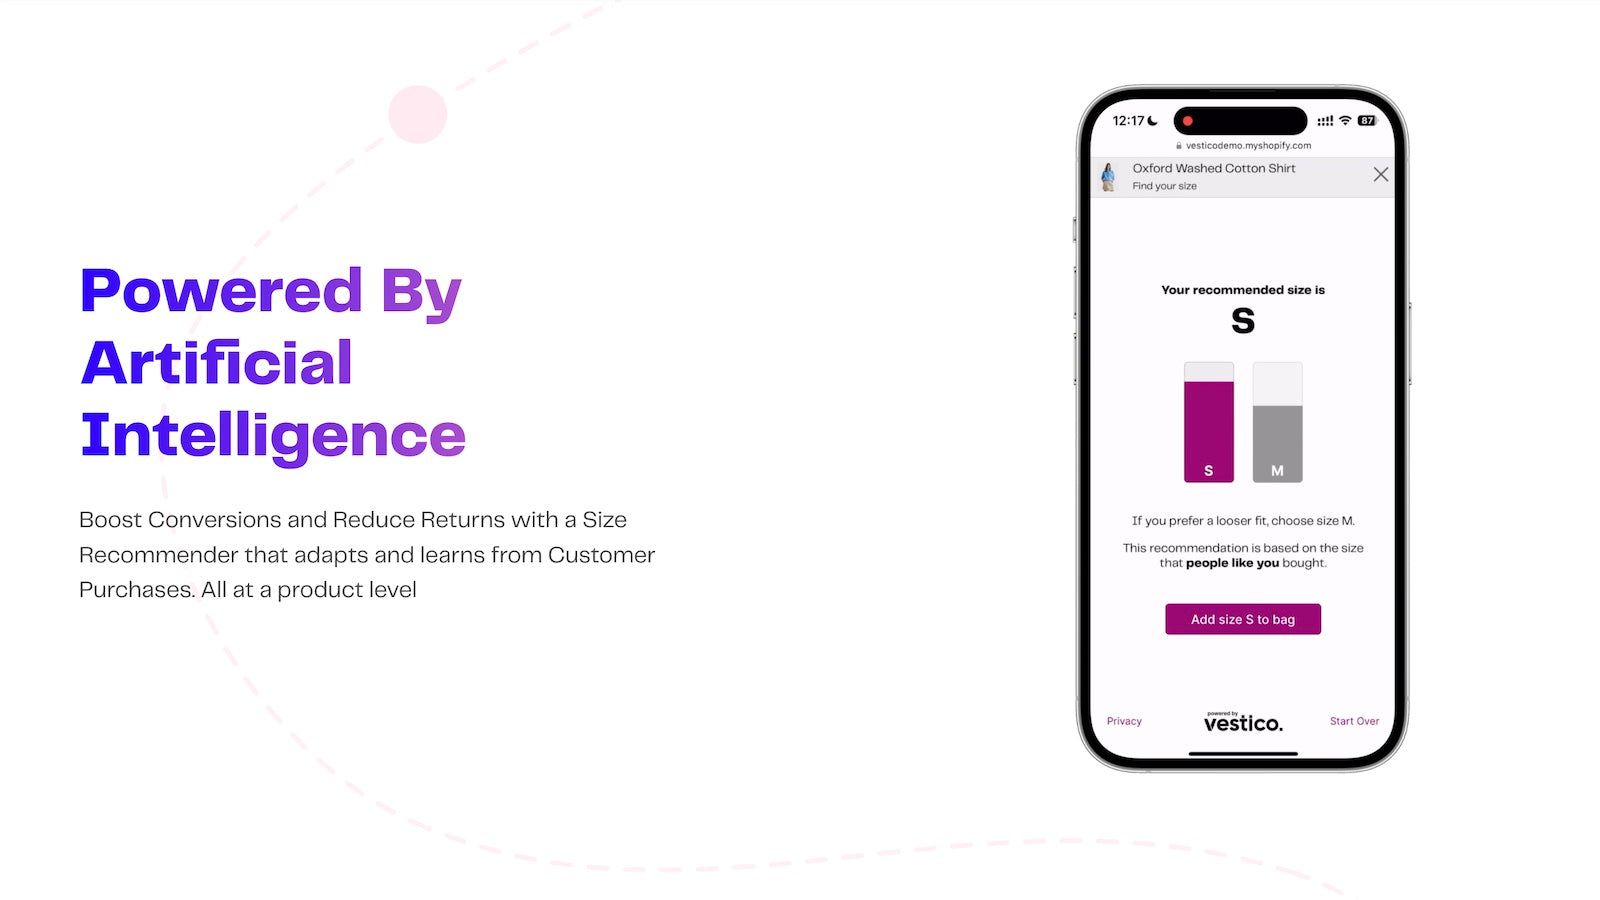 Powered by AI: Boost conversions & reduce returns.